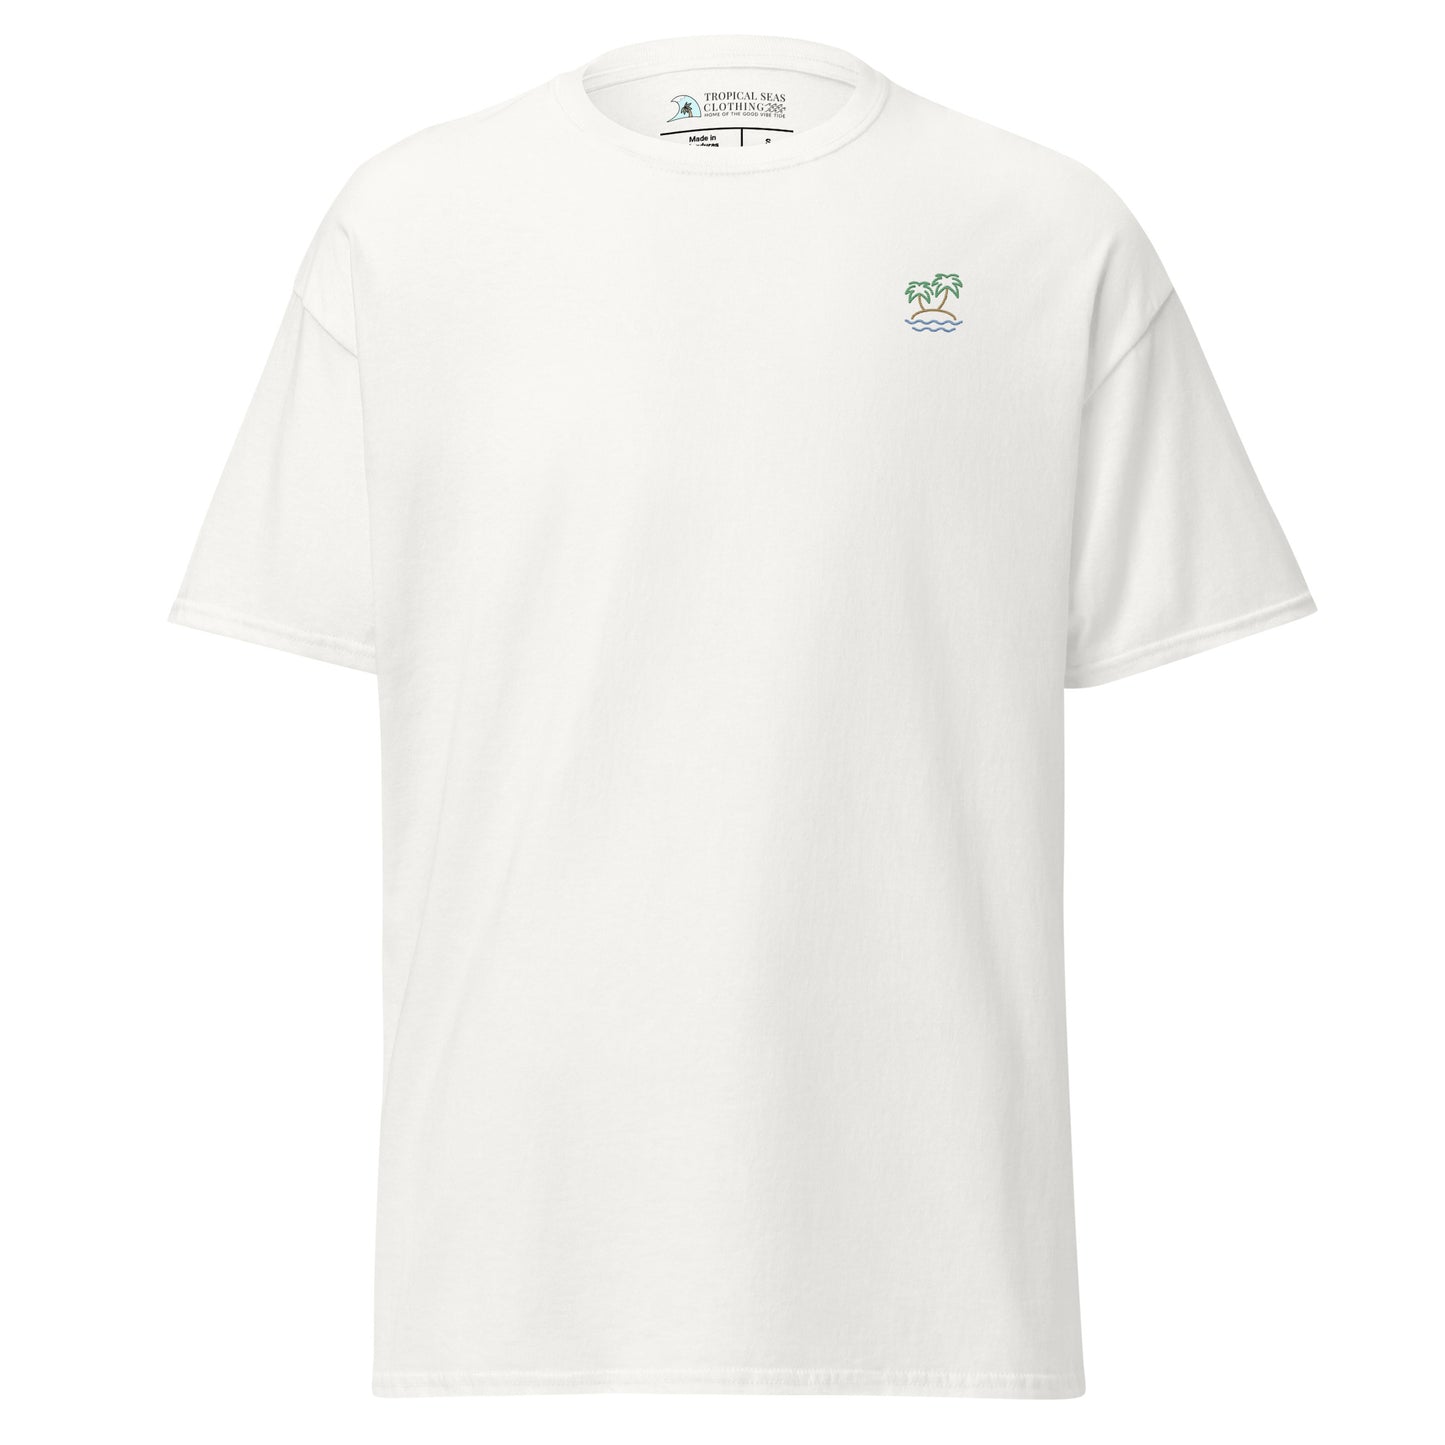 Embroidered Beach and Chill Classic Tee - Tropical Seas Clothing 